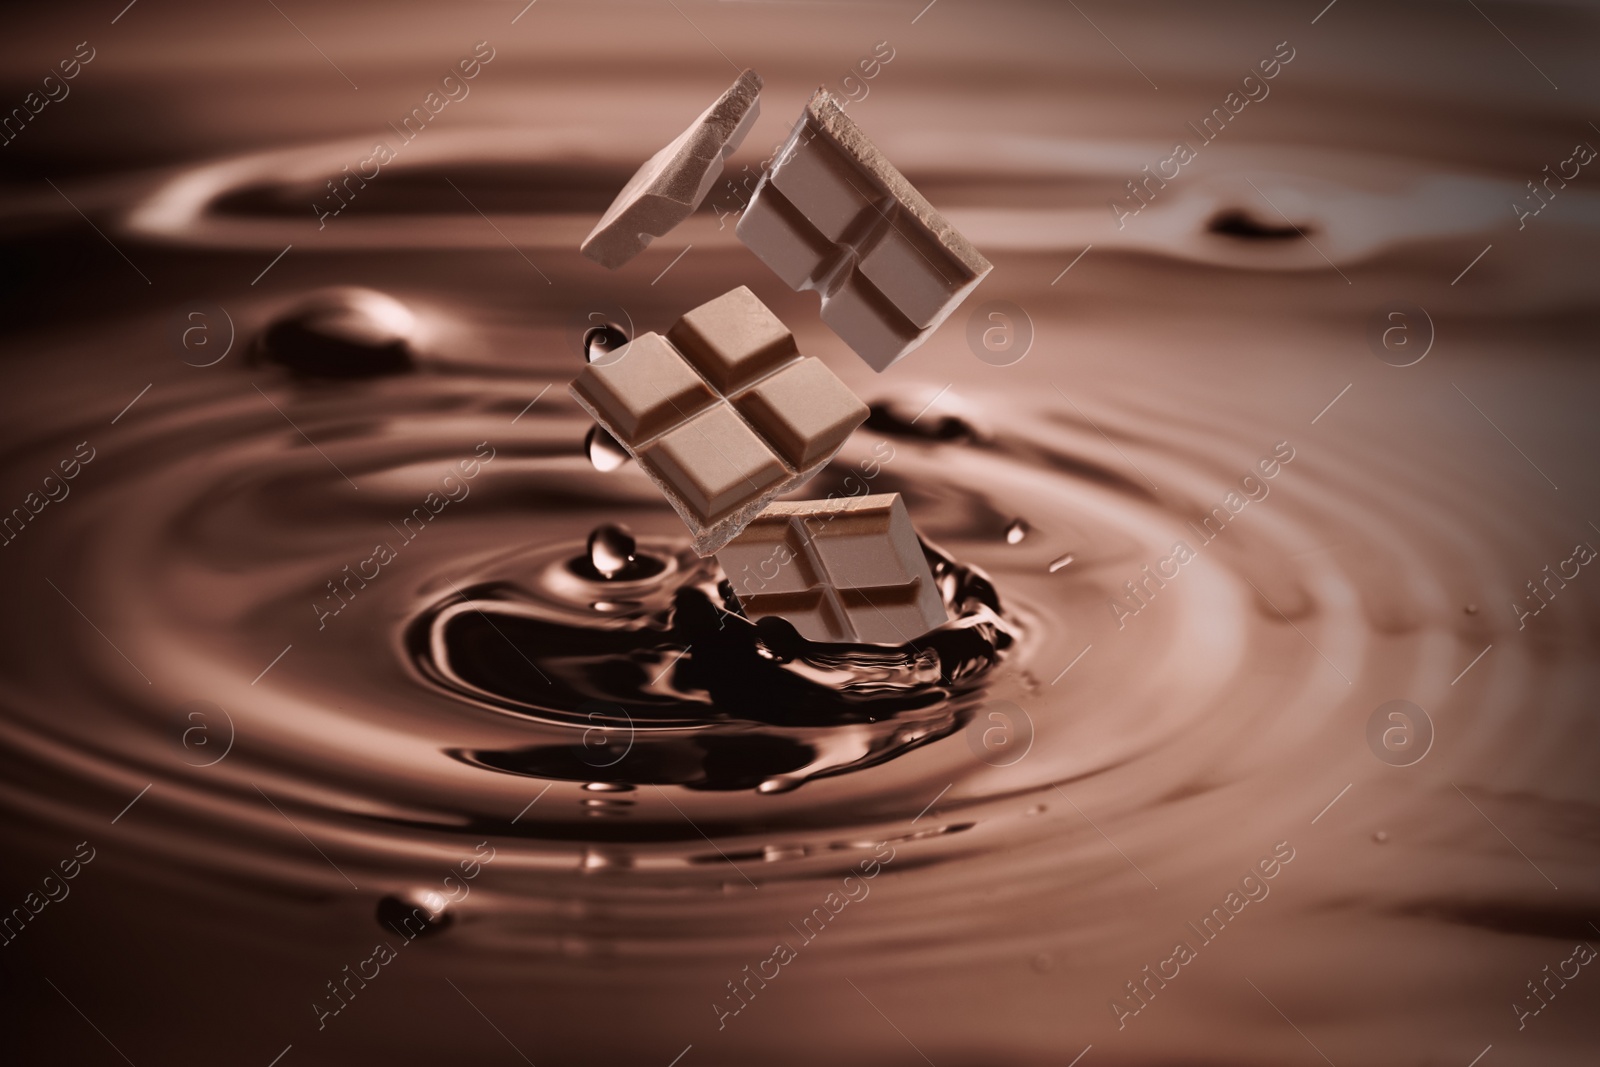 Image of Yummy melted chocolate splashing with falling pieces as background